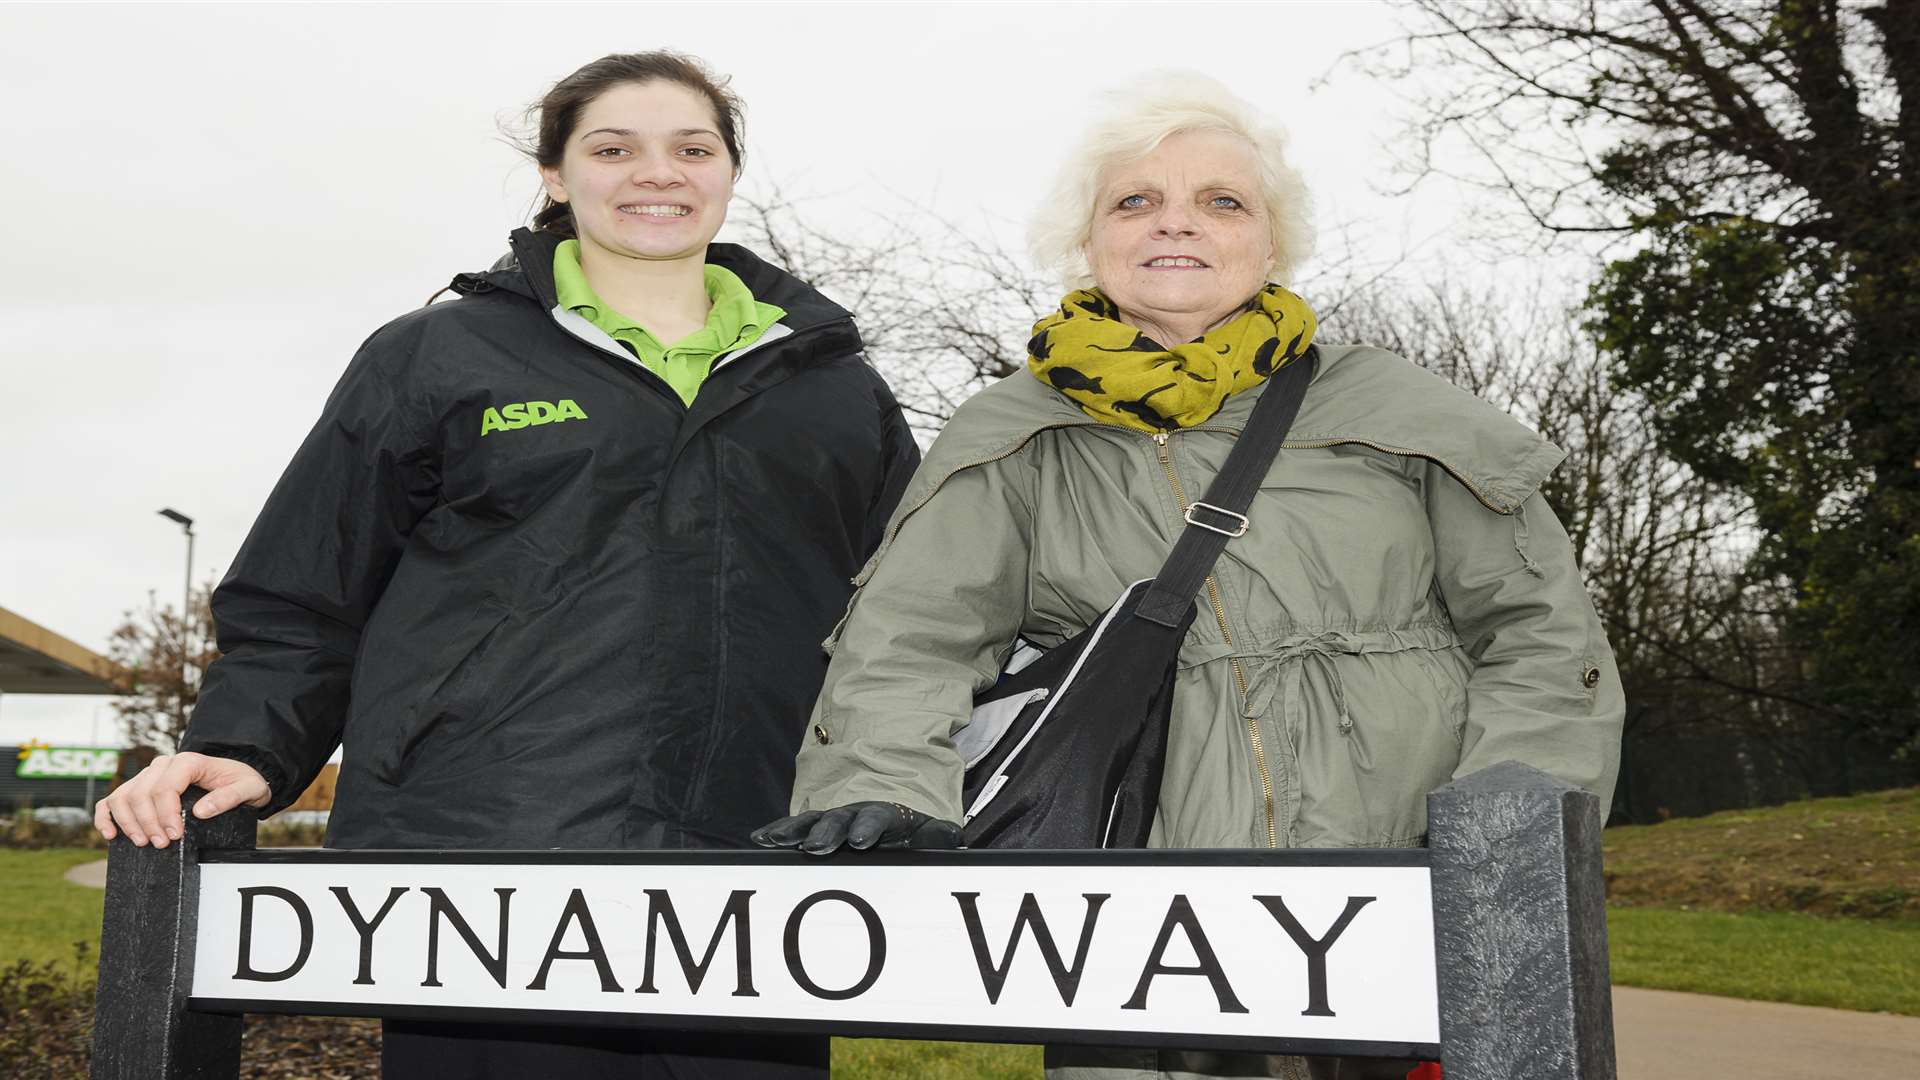 Rosie Smith from asda, and Cllr Pat Cooper at the sign